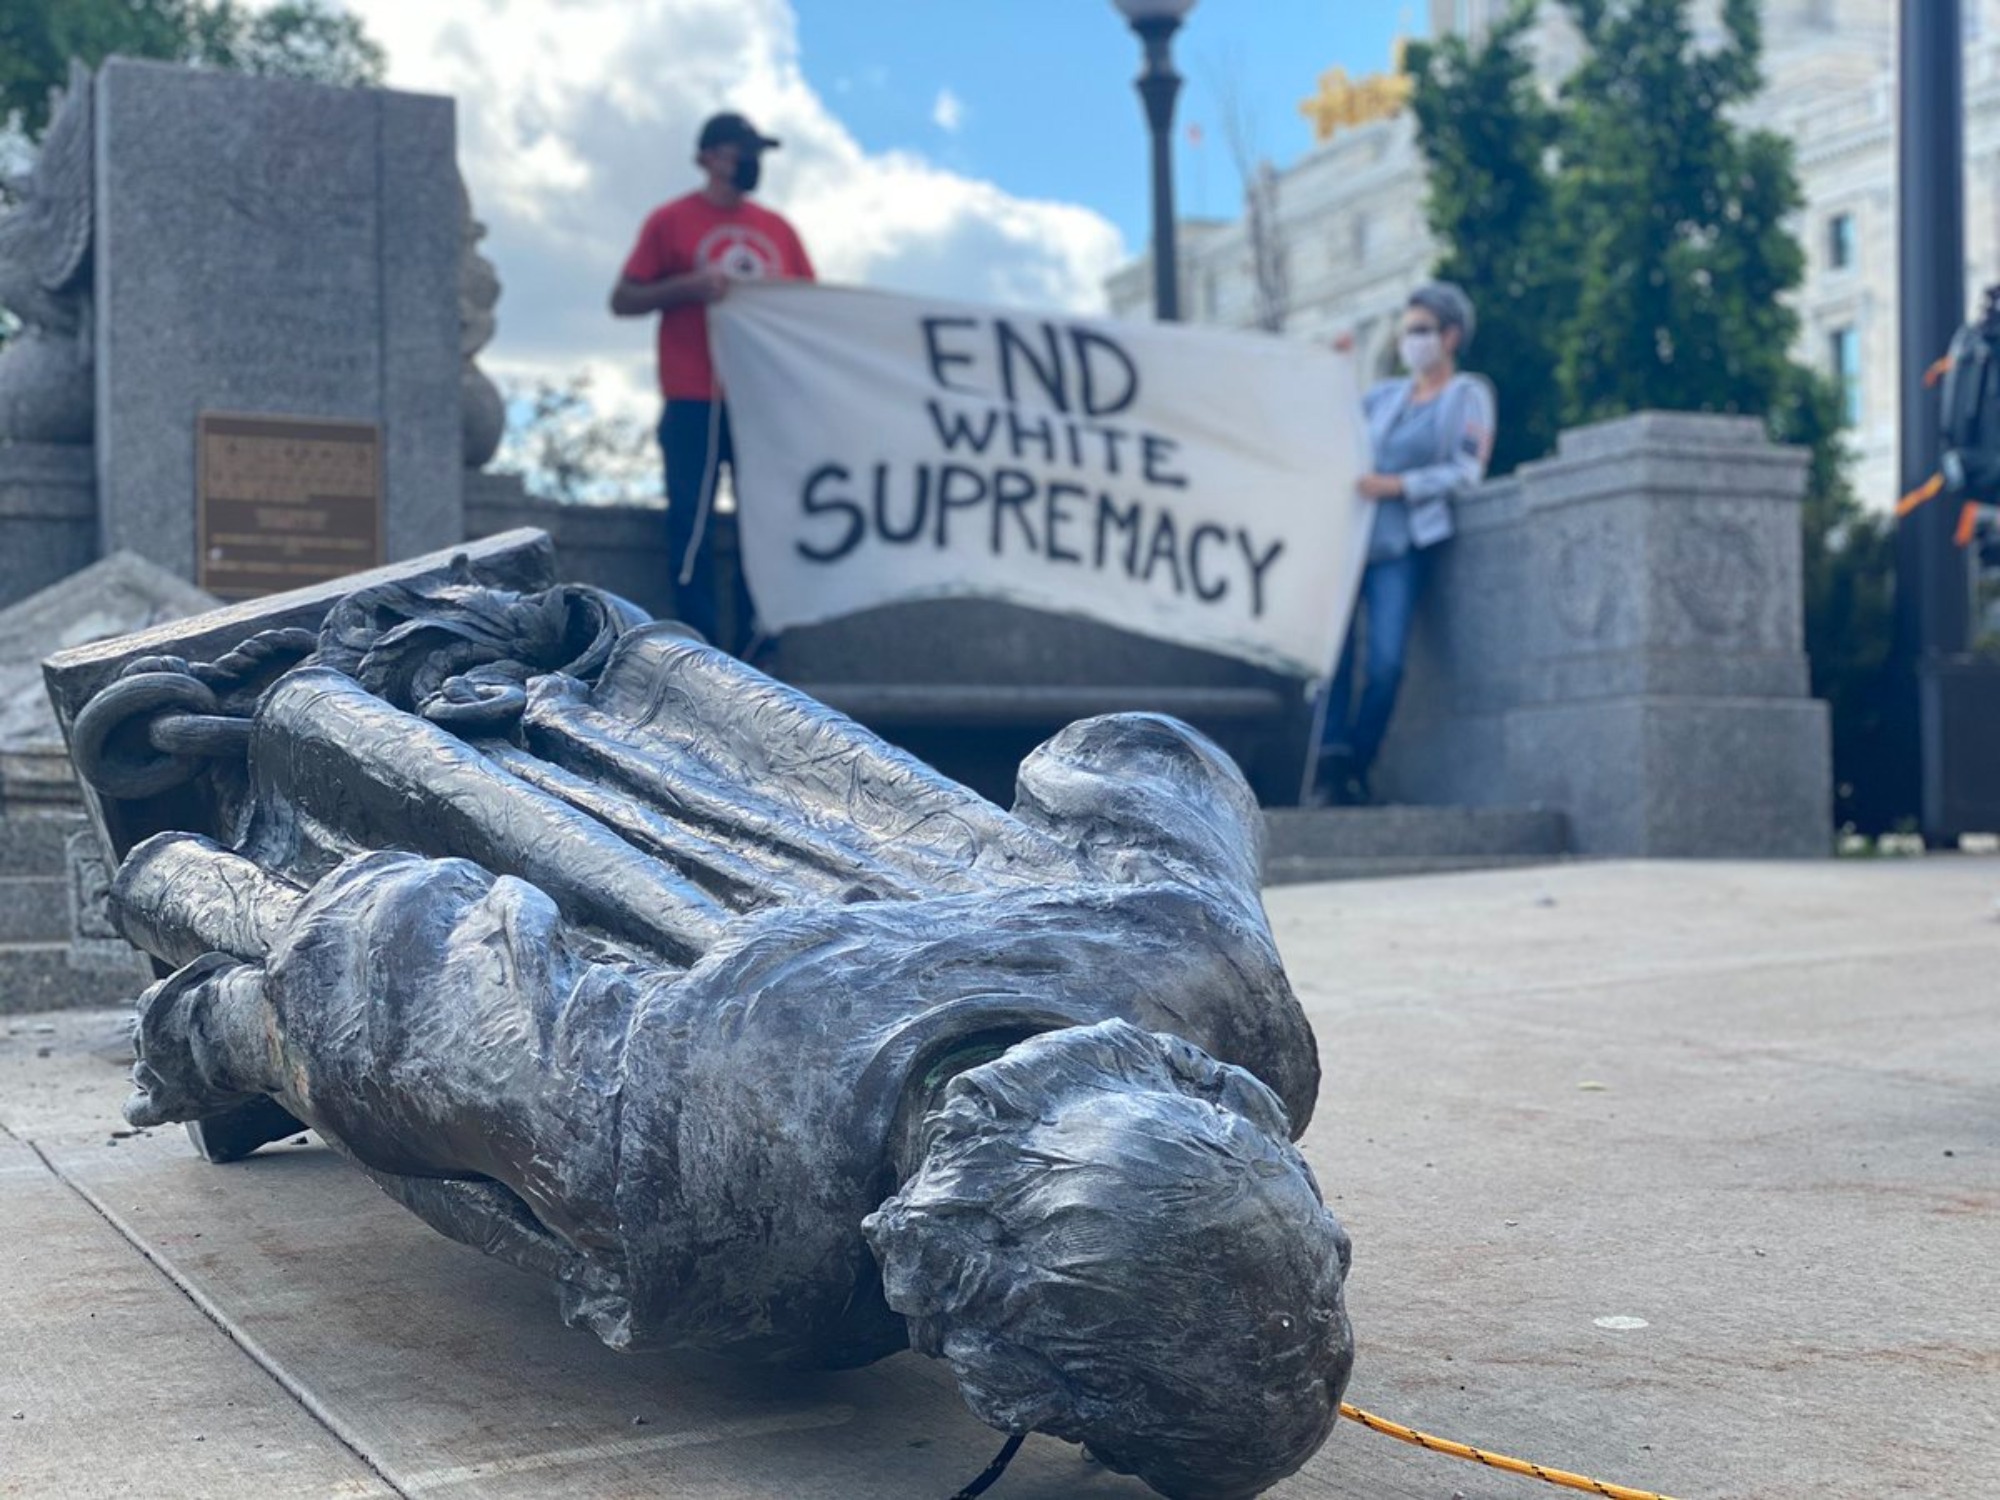 A toppled statue of Columbus near the Minnesota State Capitol. Two people hold an End White Supremacy sign in the background.